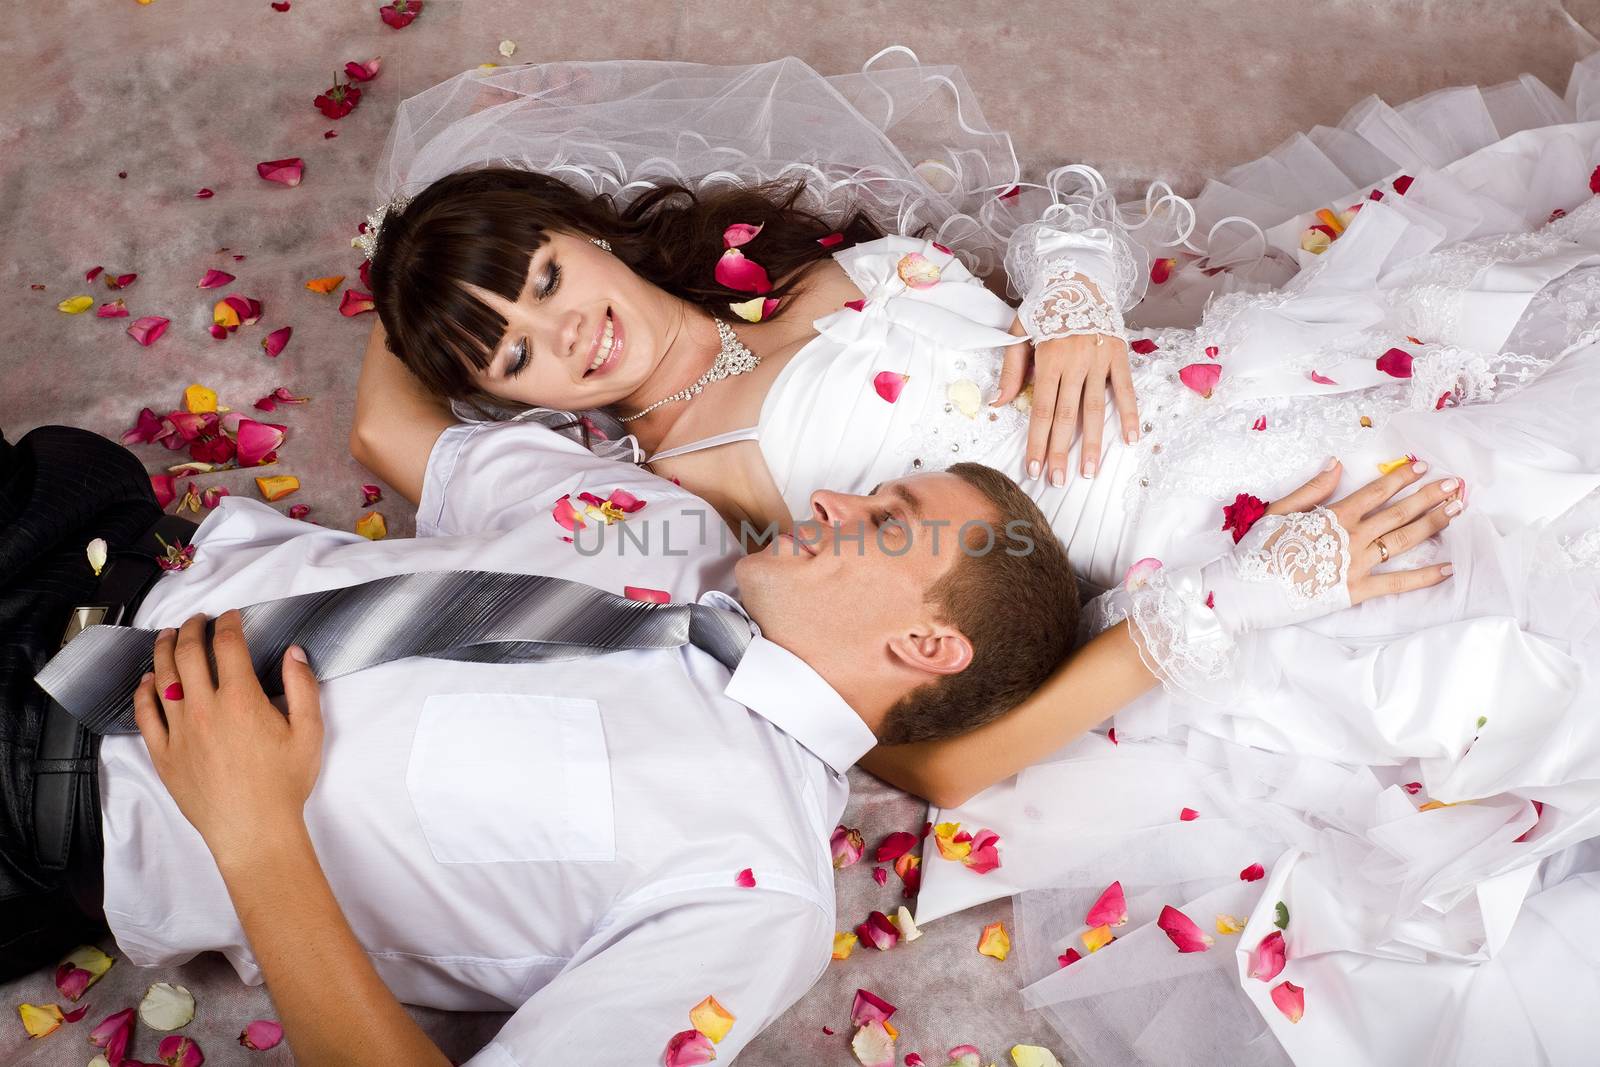 The bride and groom in wedding clothes, showering lepestami roses, lie on your back and look at each other's eyes